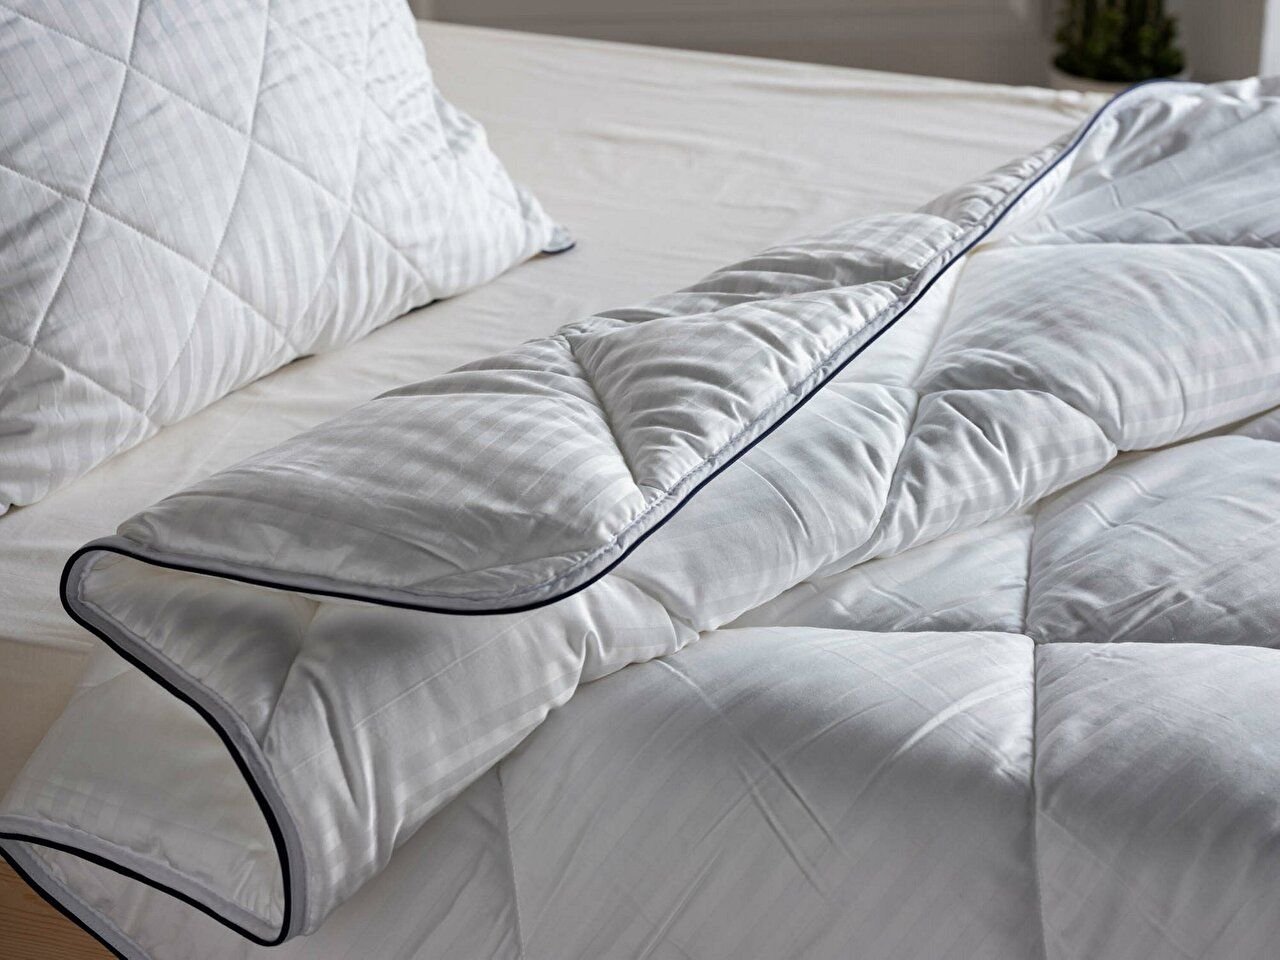 White Prestige Quilt - Queen Size, a perfect blend of comfort and style. Experience luxurious sleep with this premium quilt designed to elevate your bedding. Enjoy the softness and warmth of our meticulously crafted quilt, tailored to fit your queen size bed. Transform your bedroom into a haven of relaxation and sophistication with this exquisite quilt.